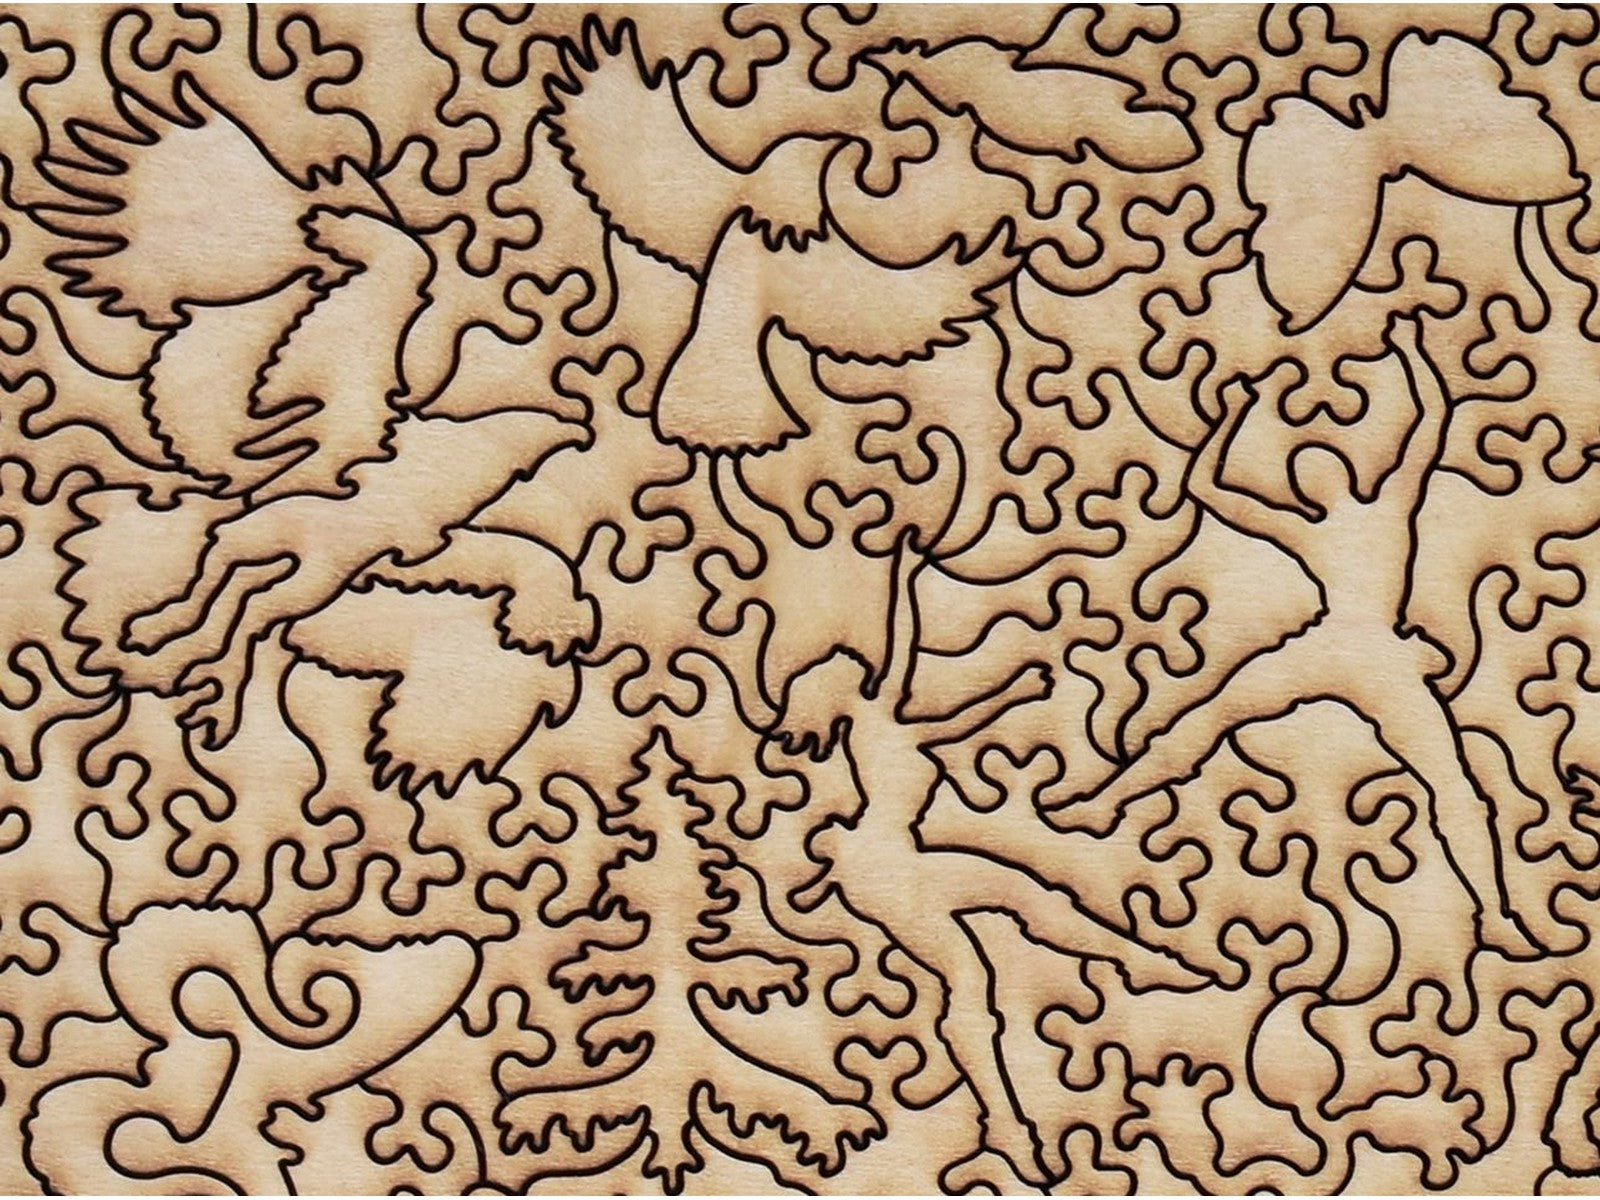 A closeup of the back of the puzzle, Chautauqua Trail, showing the detail in the pieces.